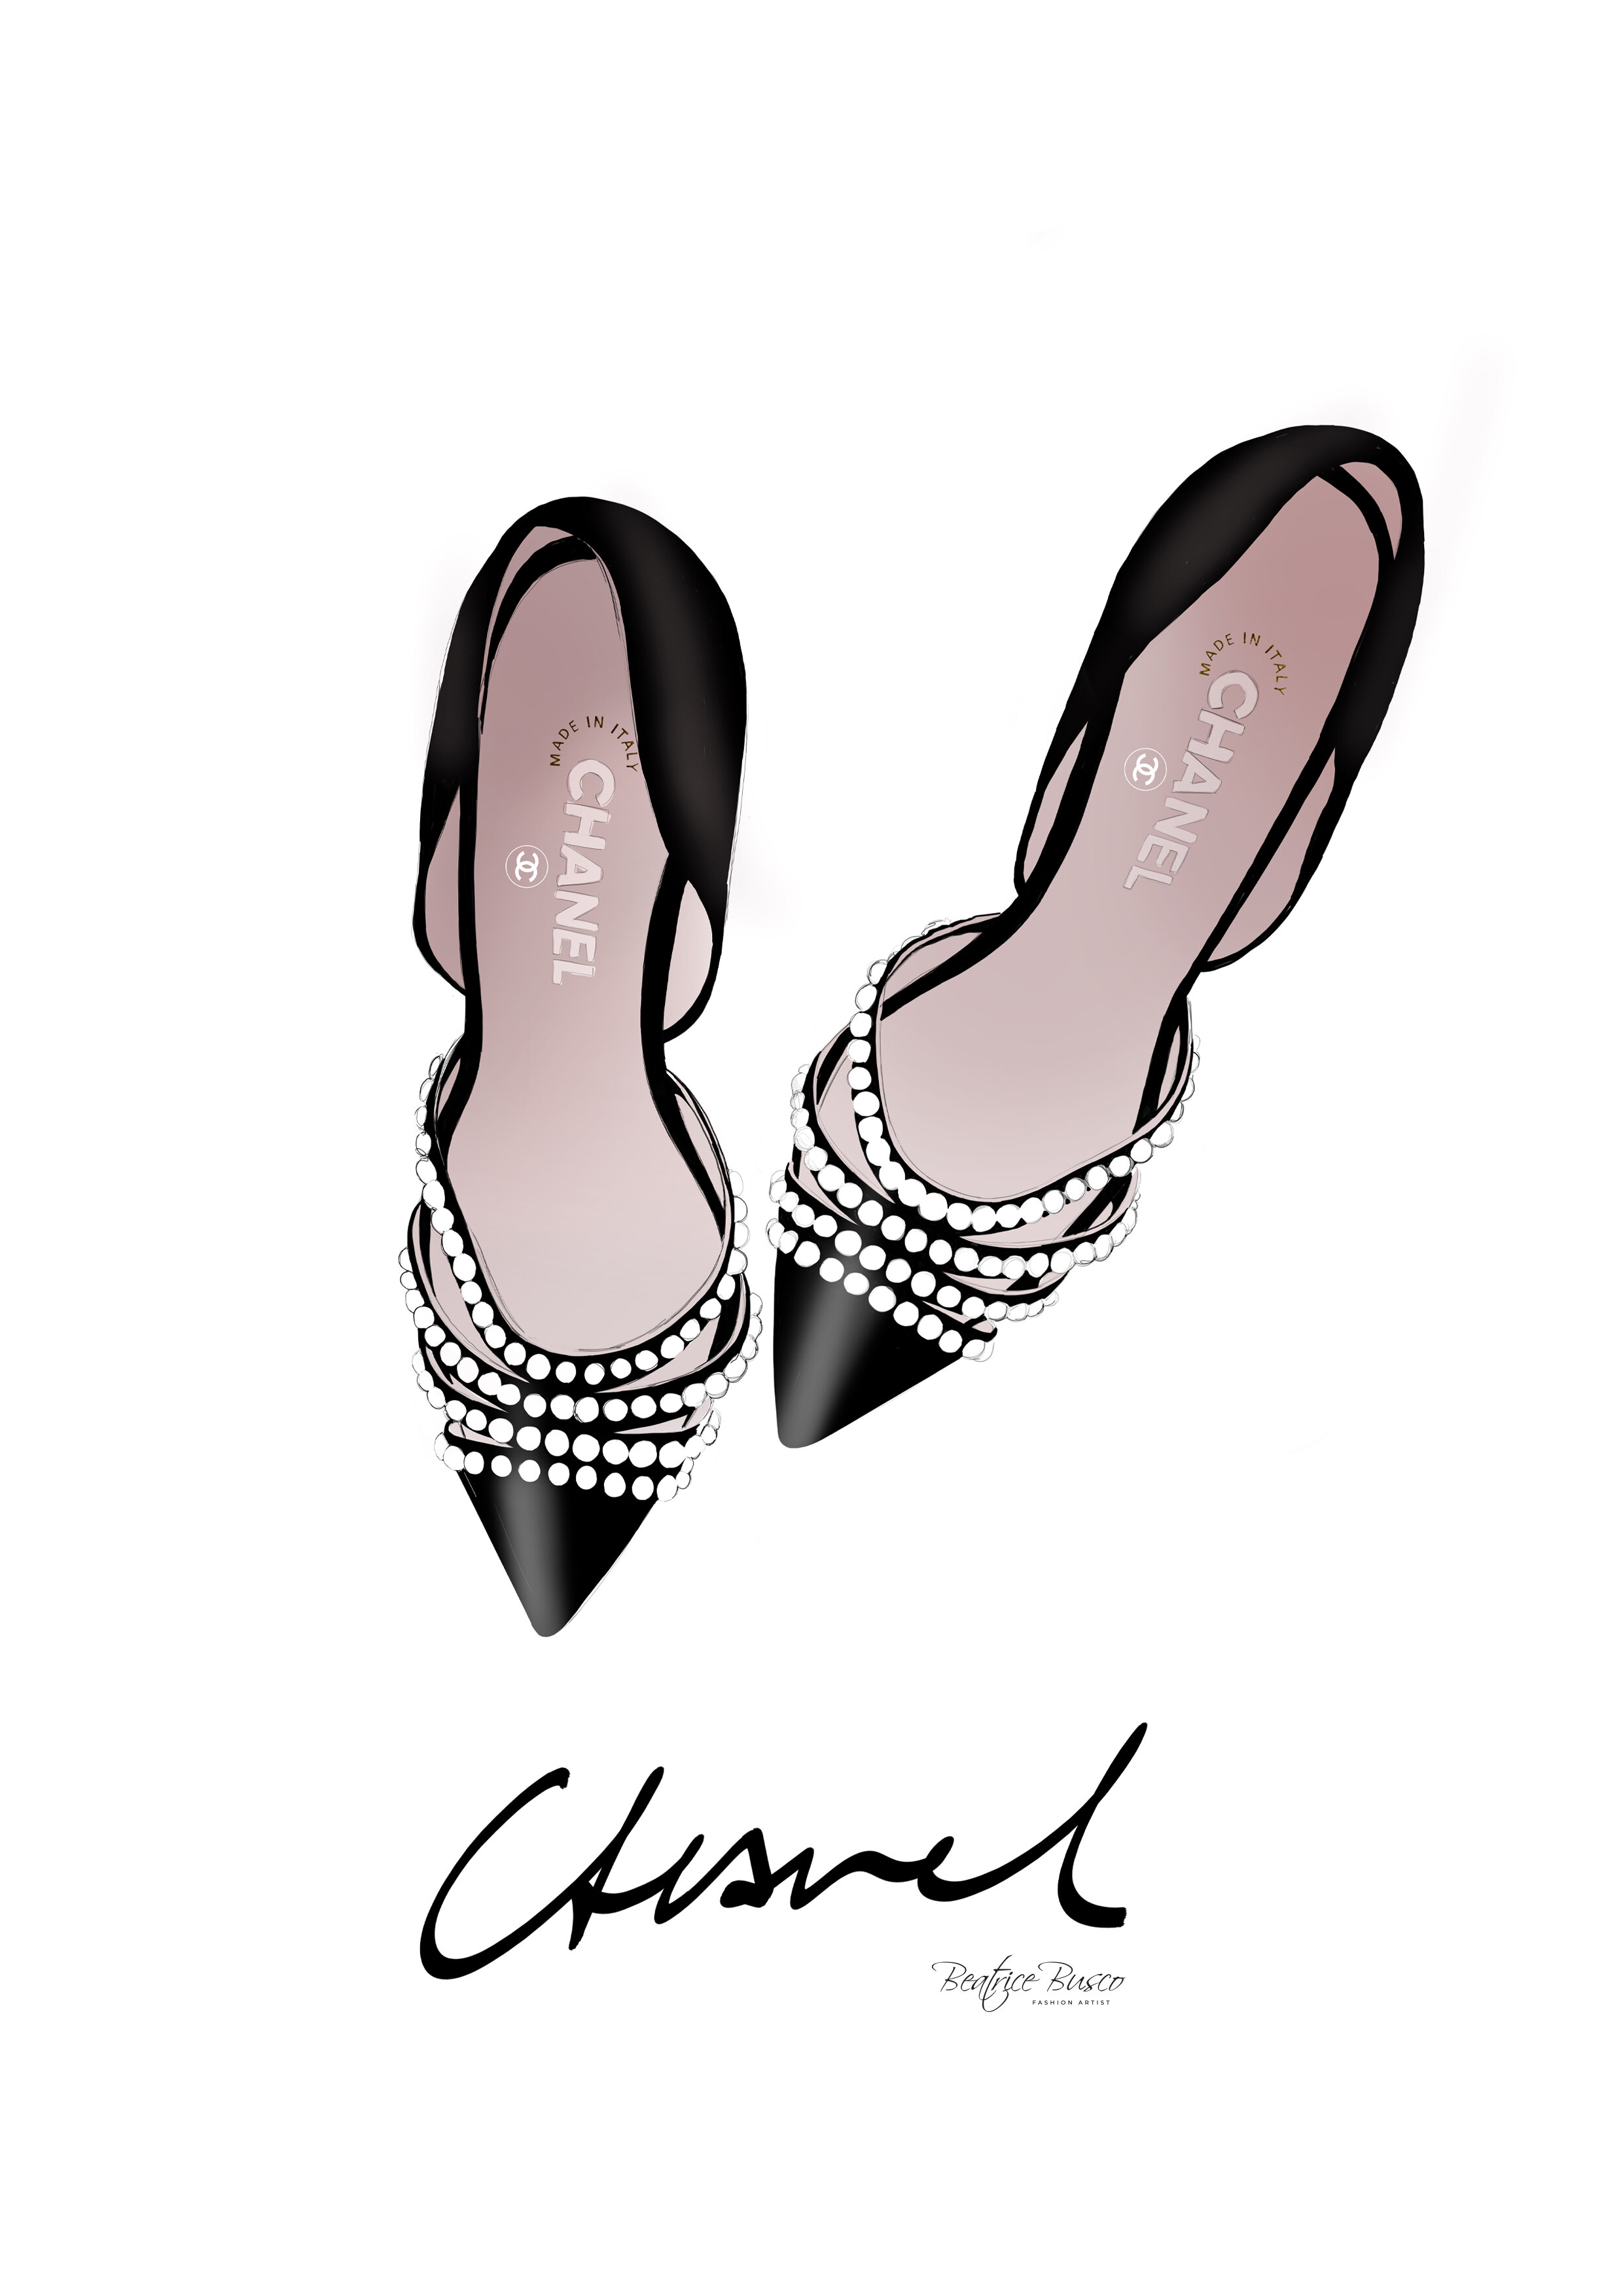 Chanel Shoes — Beatrice Busco